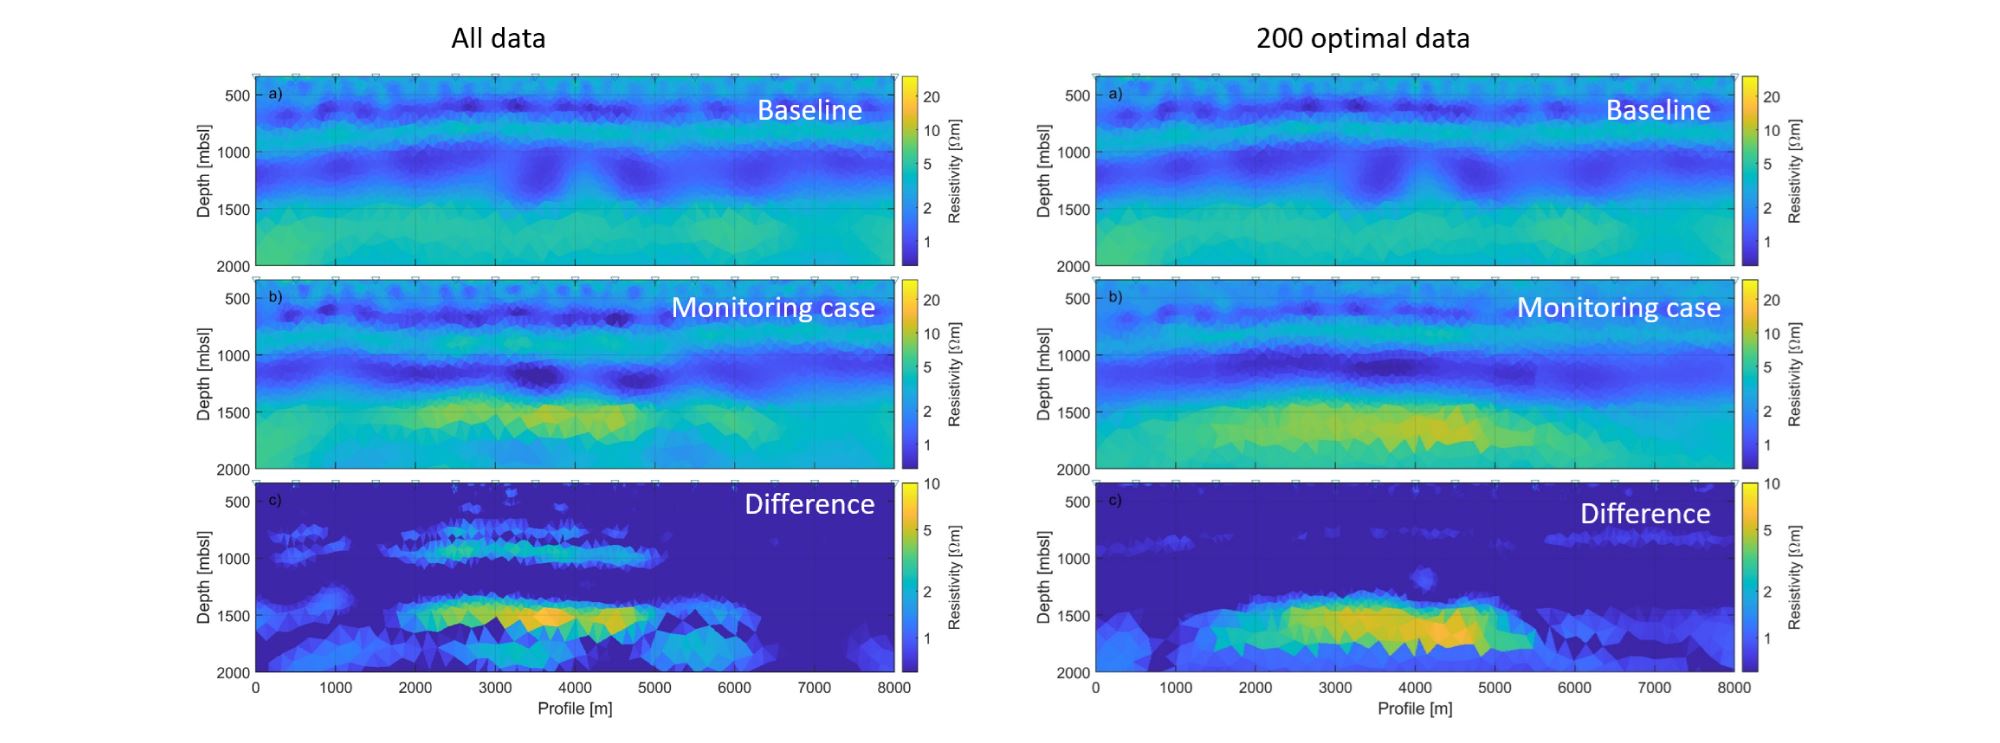 Figure 1: Resistivity models obtained using CSEM inversion for a synthetic Smeaheia model. The top row shows the inversion of baseline data before injection, while the middle row shows the inversion of data after injection. The bottom row models show the difference before and after injection. [left column] Results using all data (approximately 17000 data points) from a dense survey. [right column] Results using 200 carefully selected data points. Results are similar despite the significant reduction in acquired data.